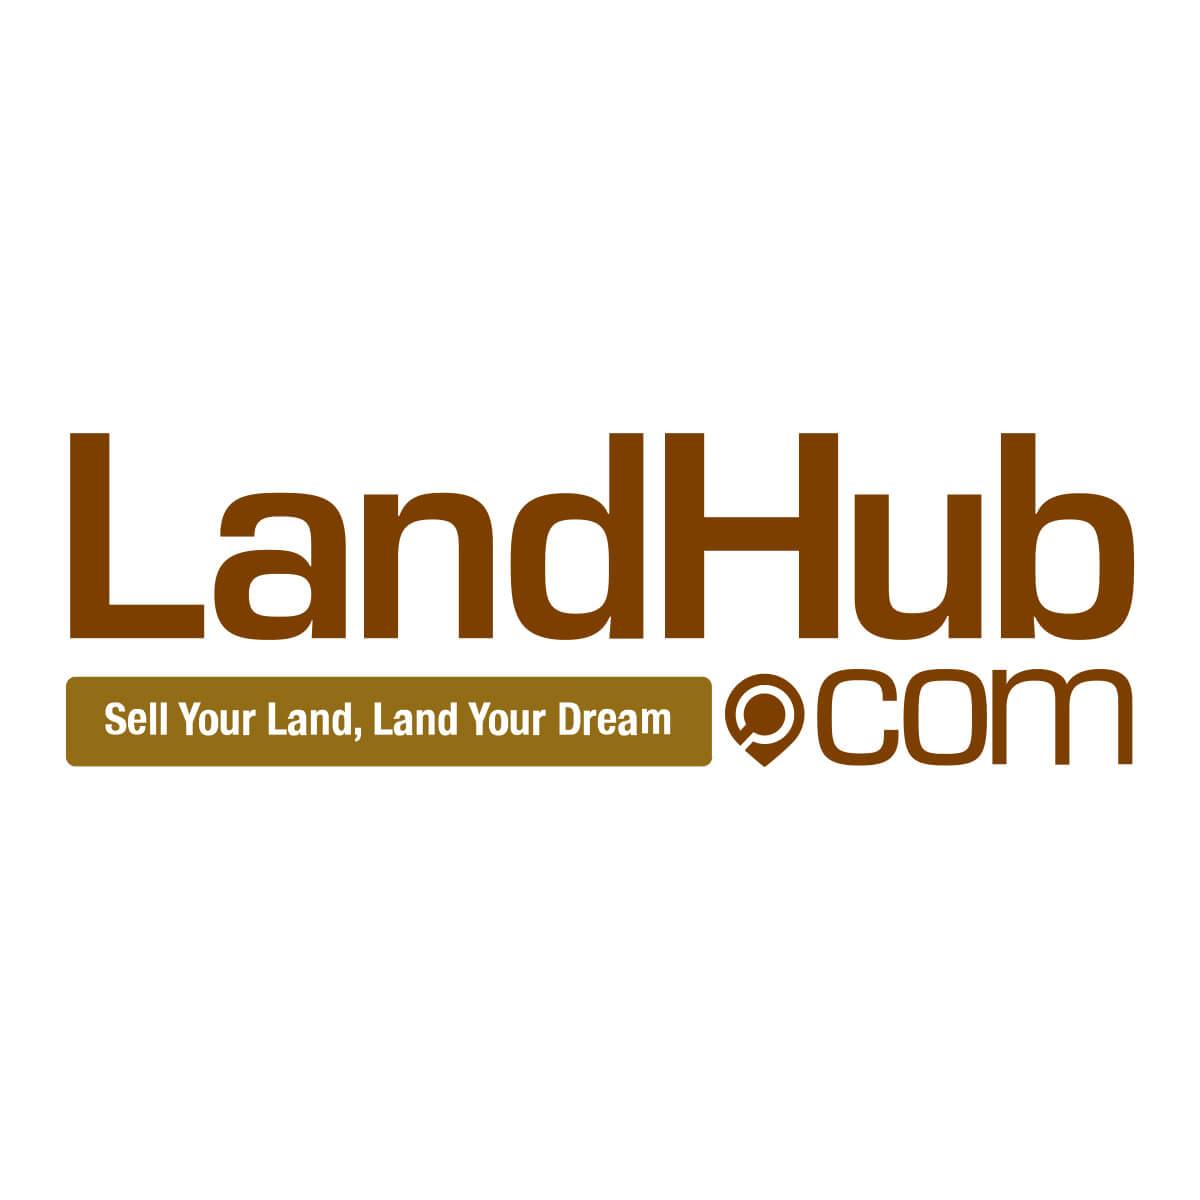 93 plus potential land disclosure issues